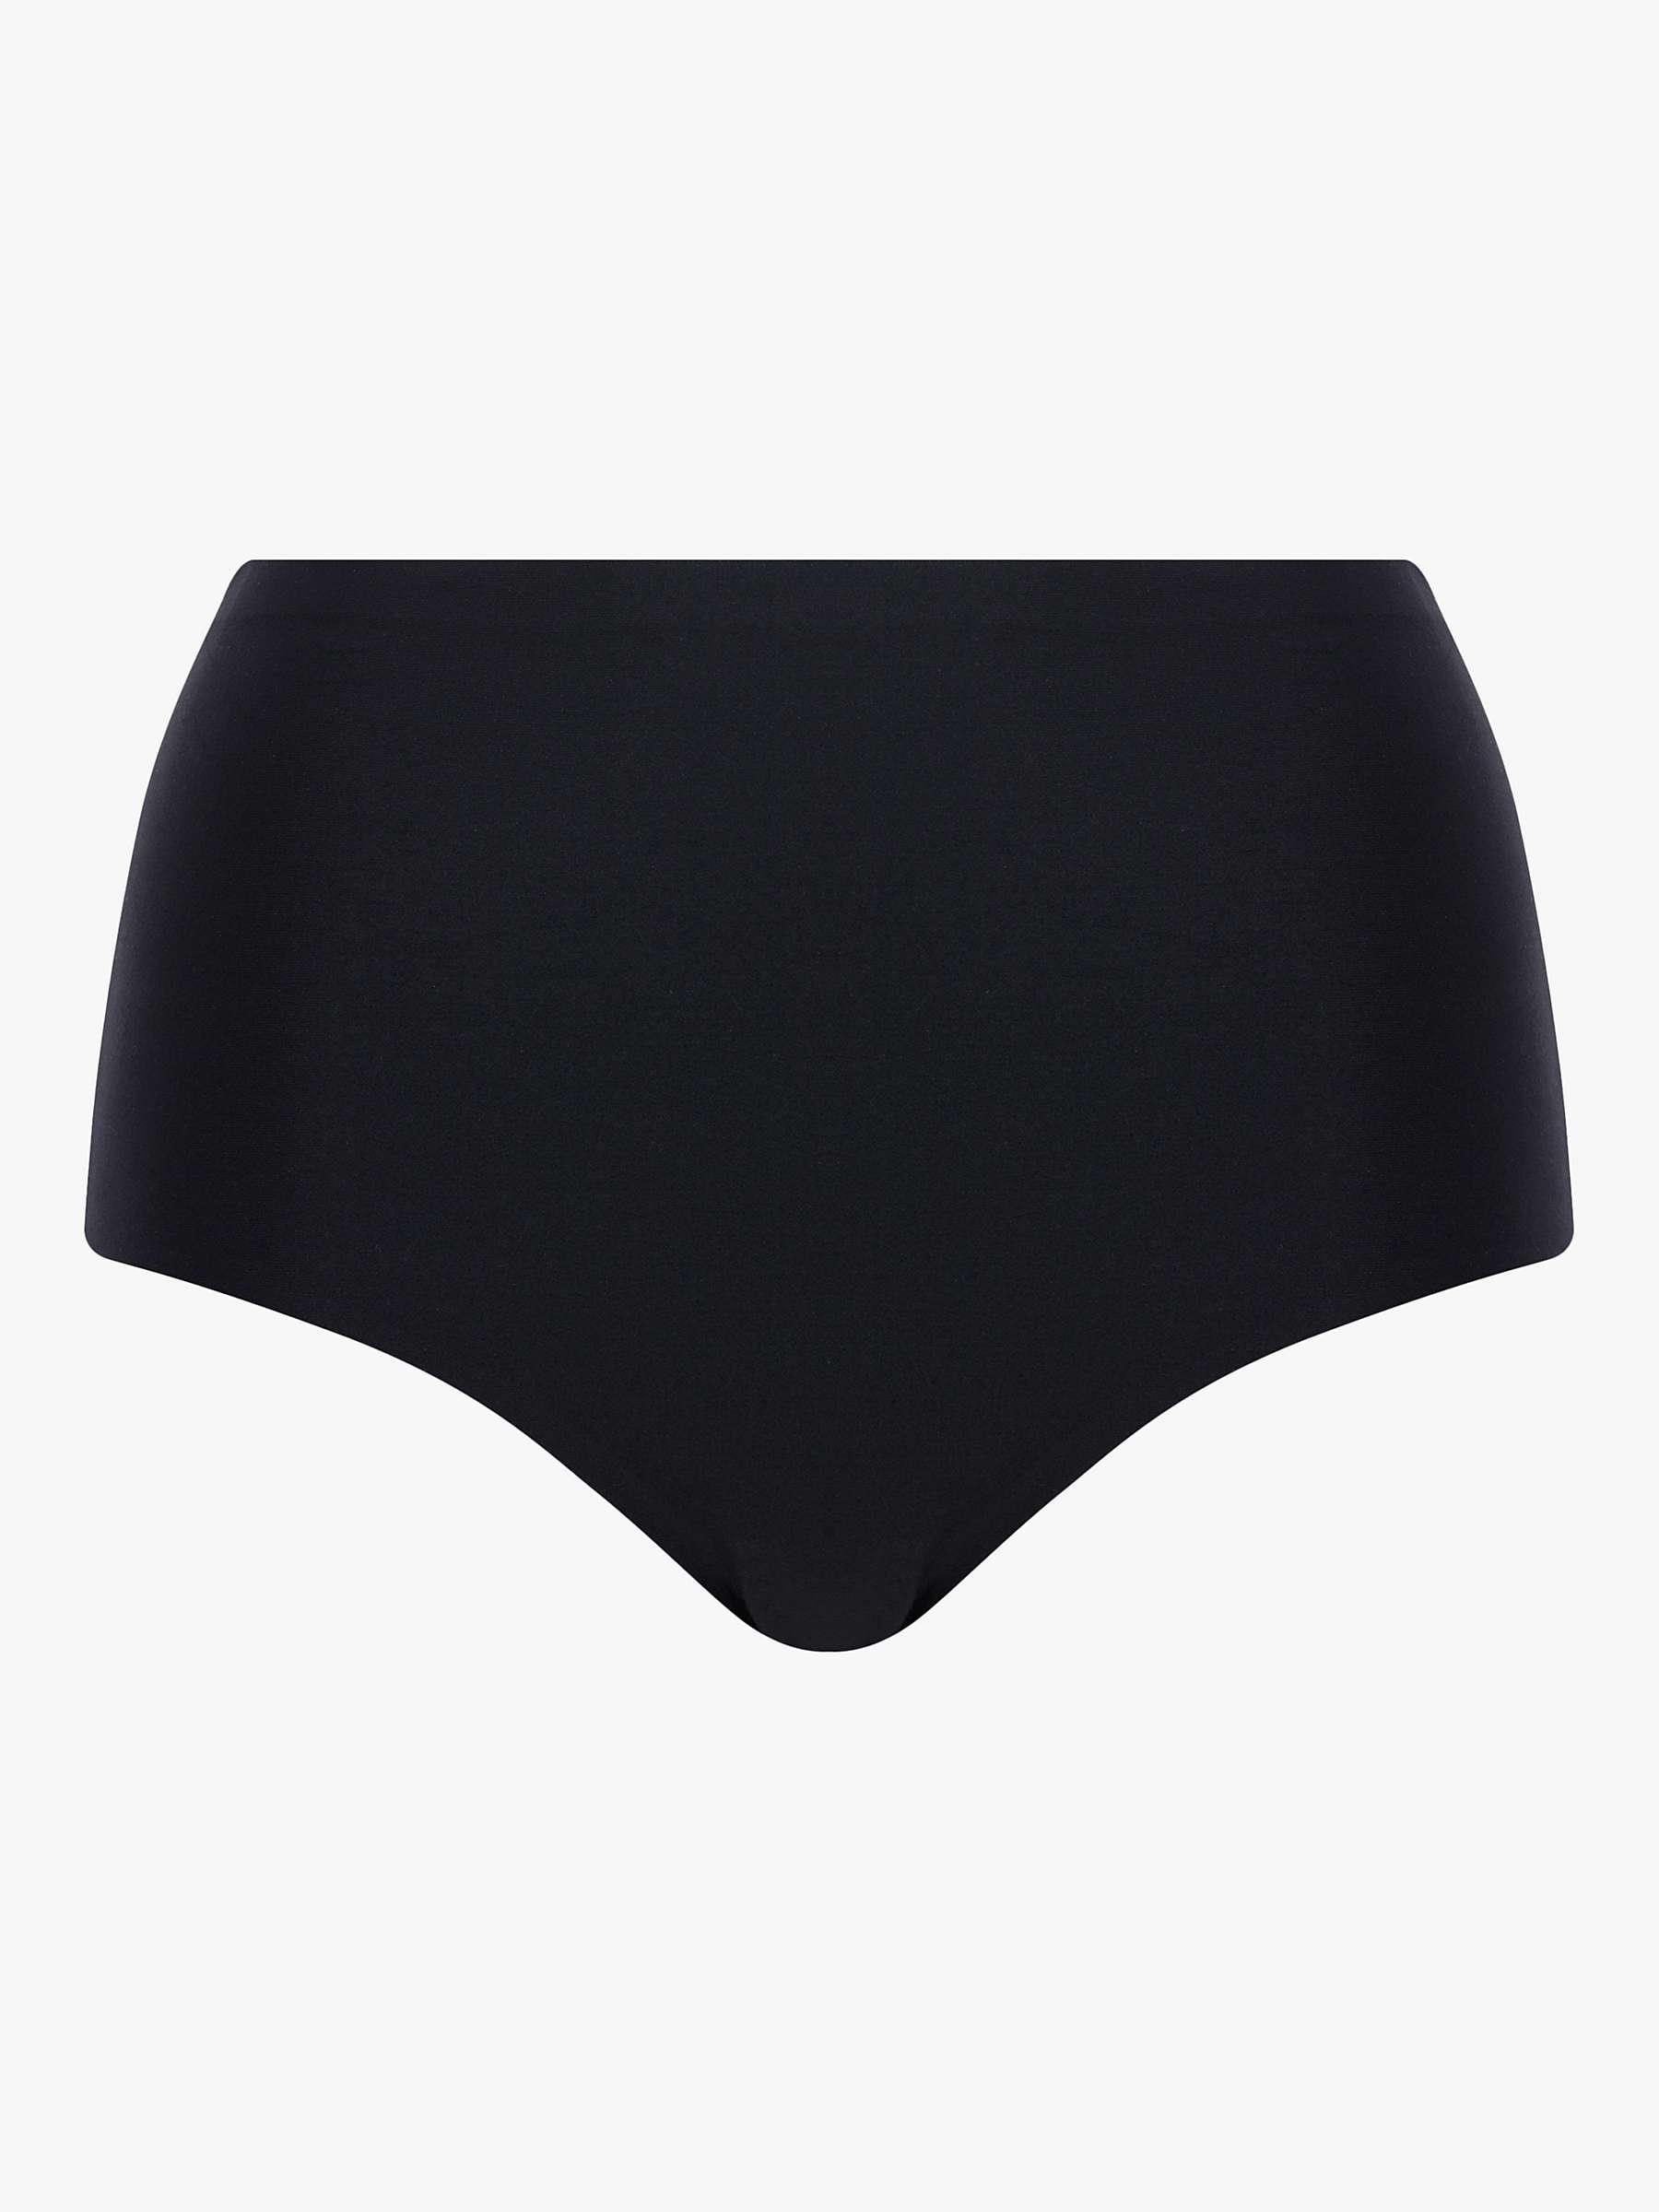 Buy Chantelle Soft Stretch High Waist Plus Knickers Online at johnlewis.com